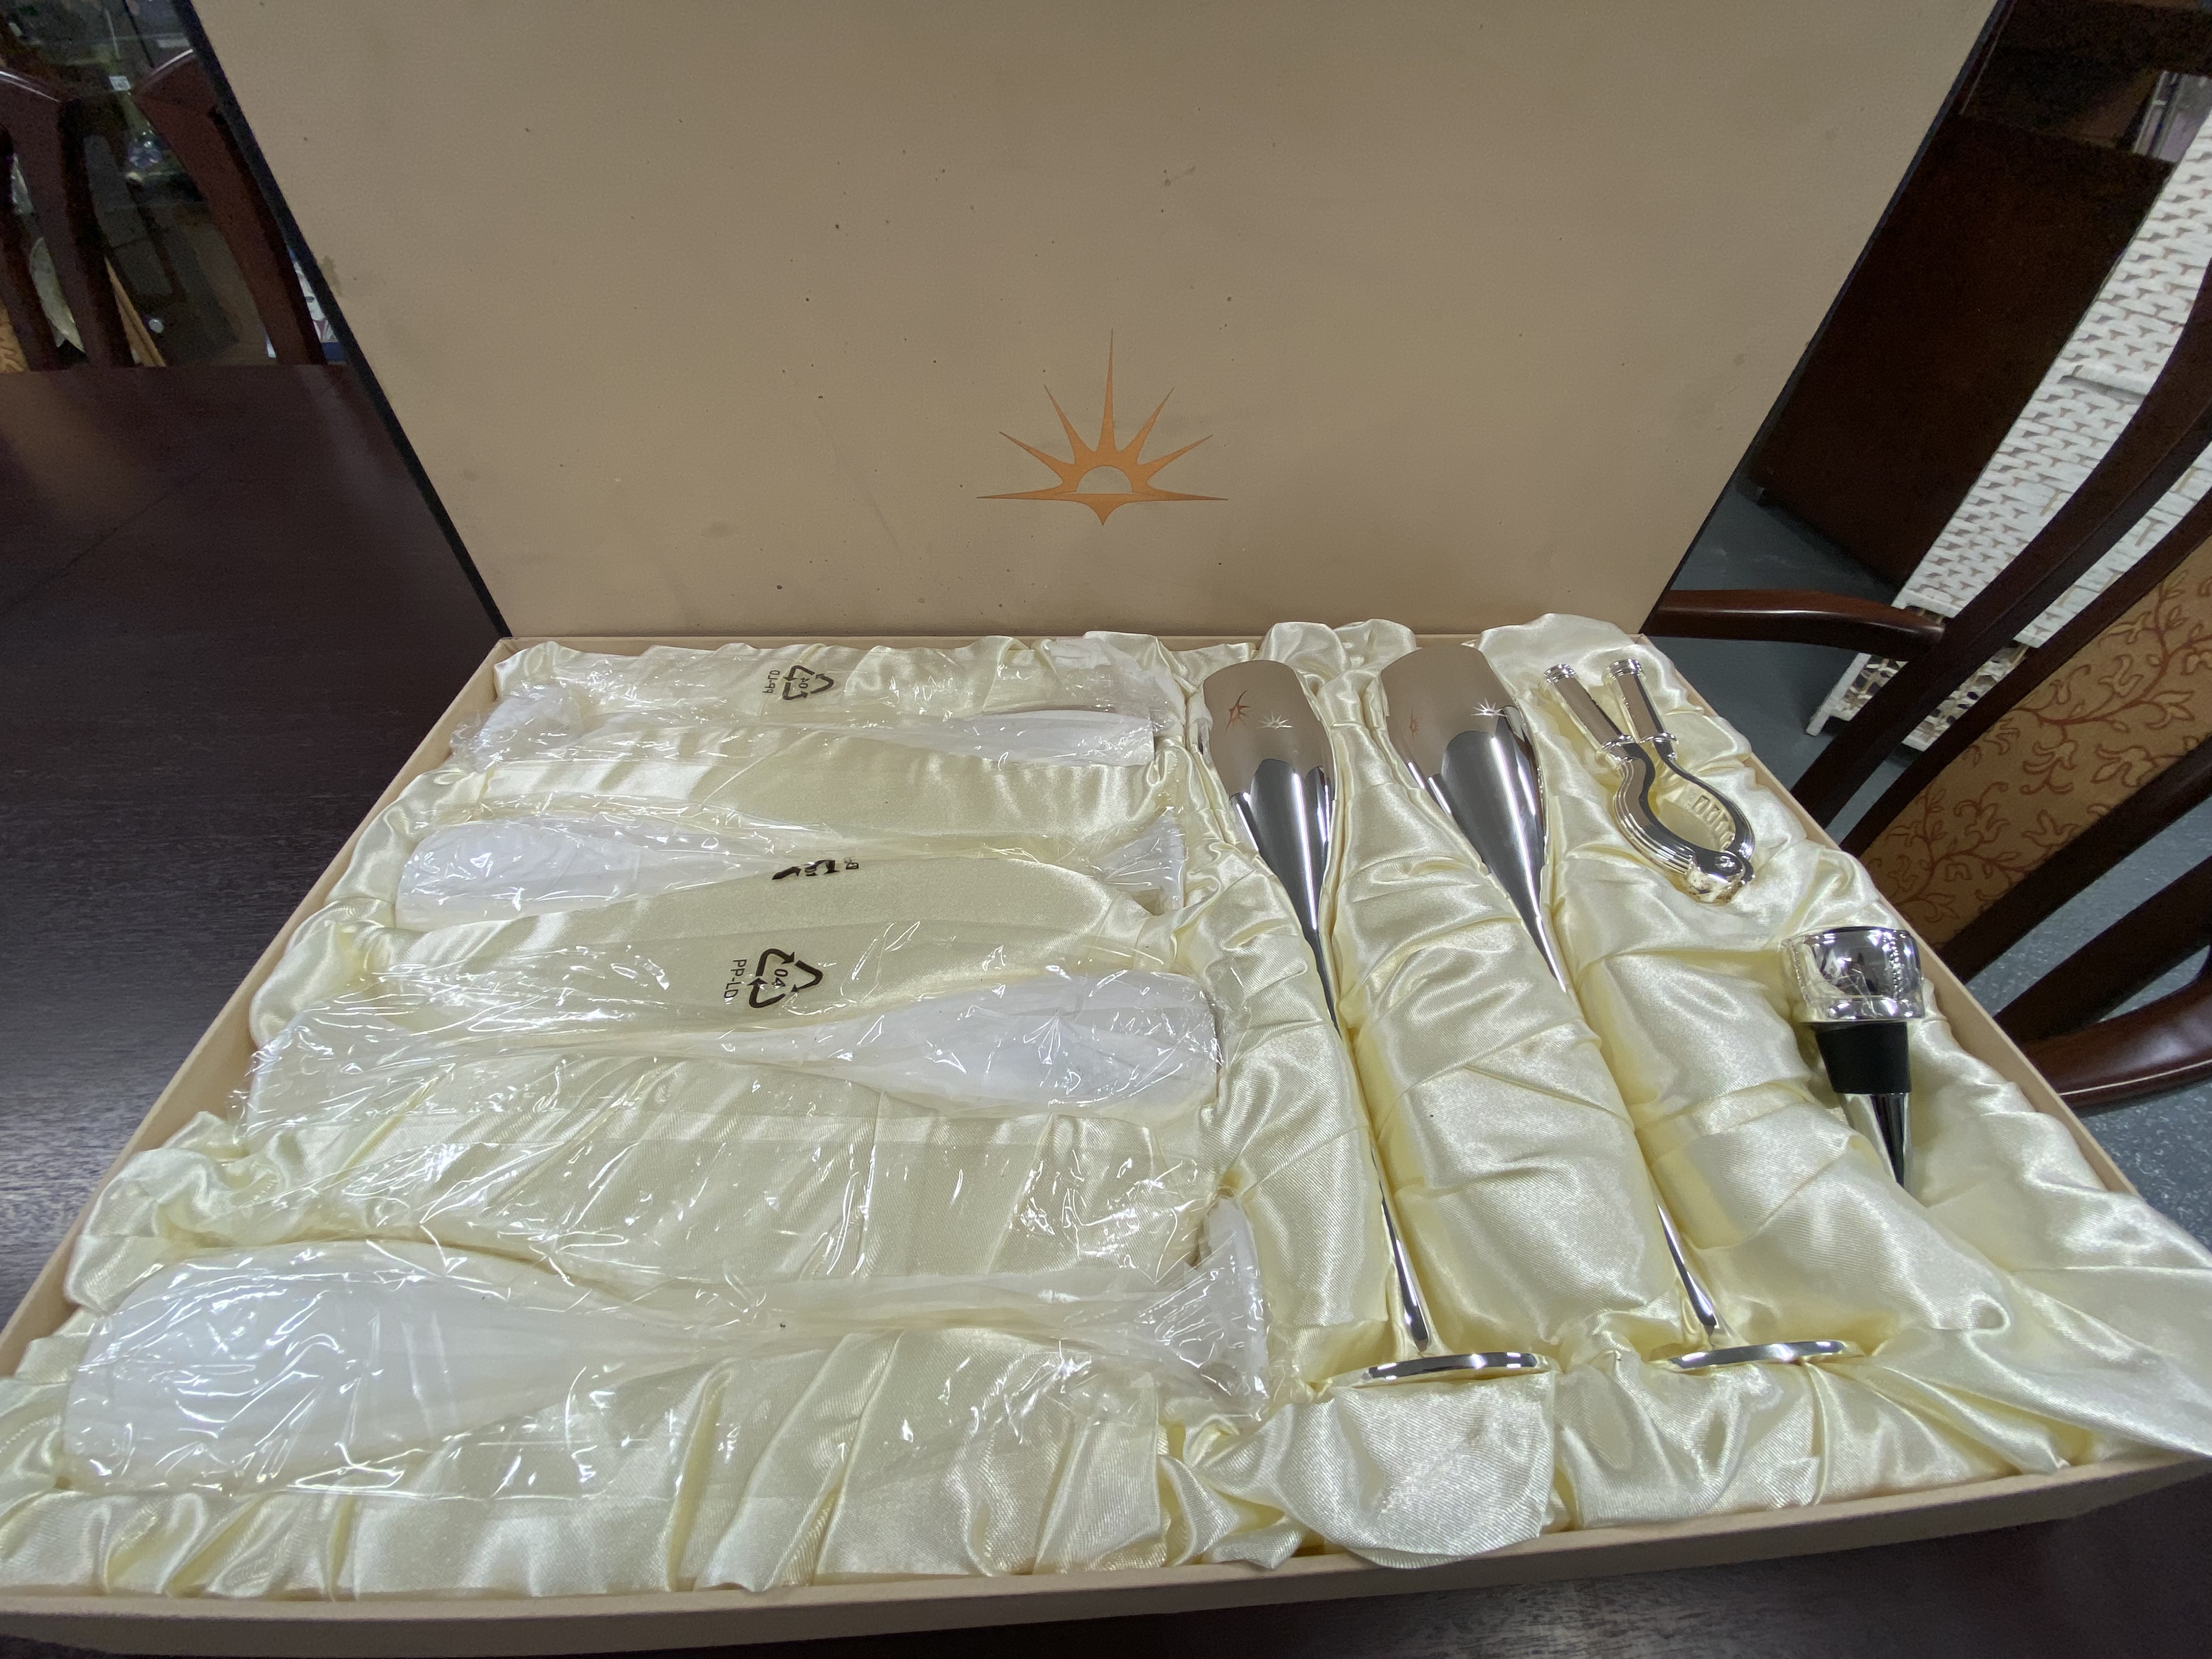 Boxed set of six silver coloured and gilt champagne flutes with matching stopper (P&O Cruises) - Image 2 of 3